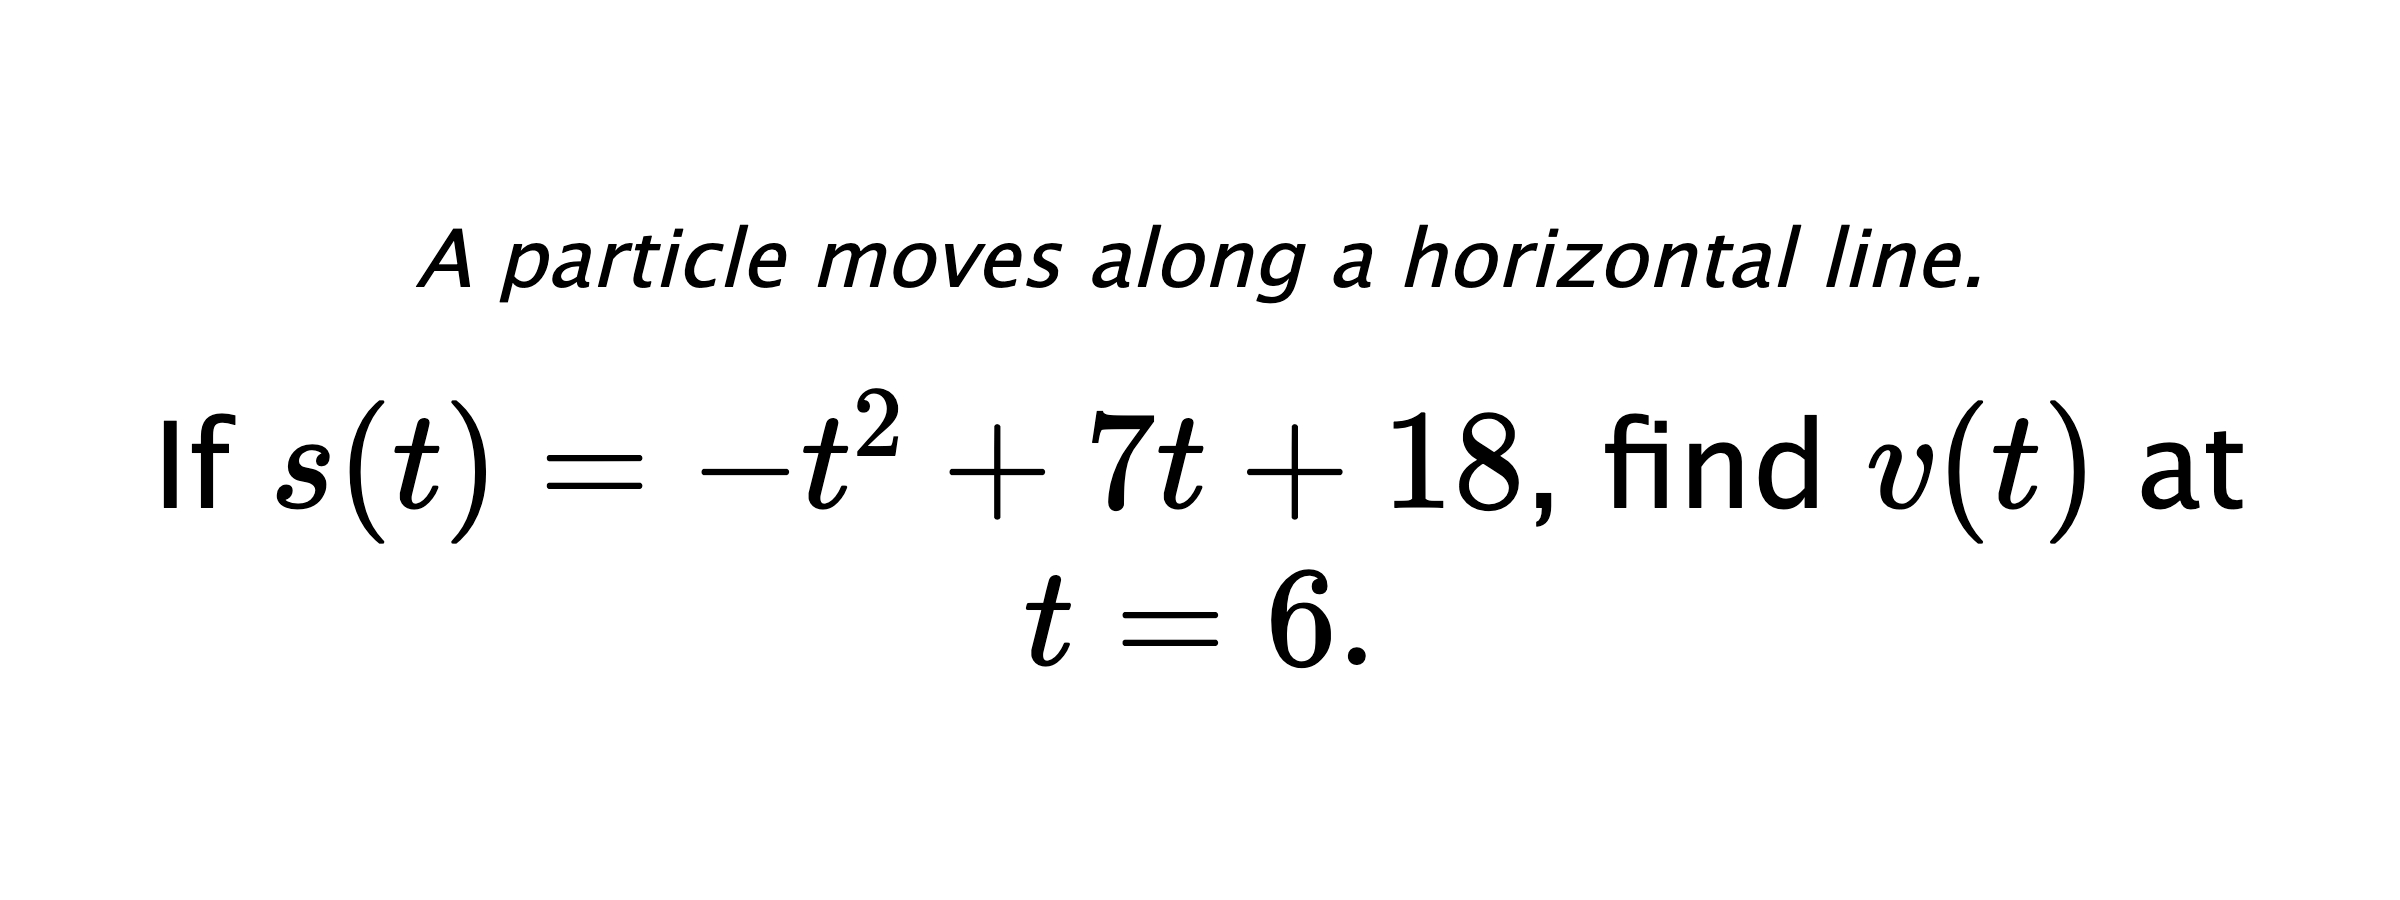 A particle moves along a horizontal line. If $ s(t)=-t^2+7t+18 $, find $ v(t) $ at $ t=6 .$